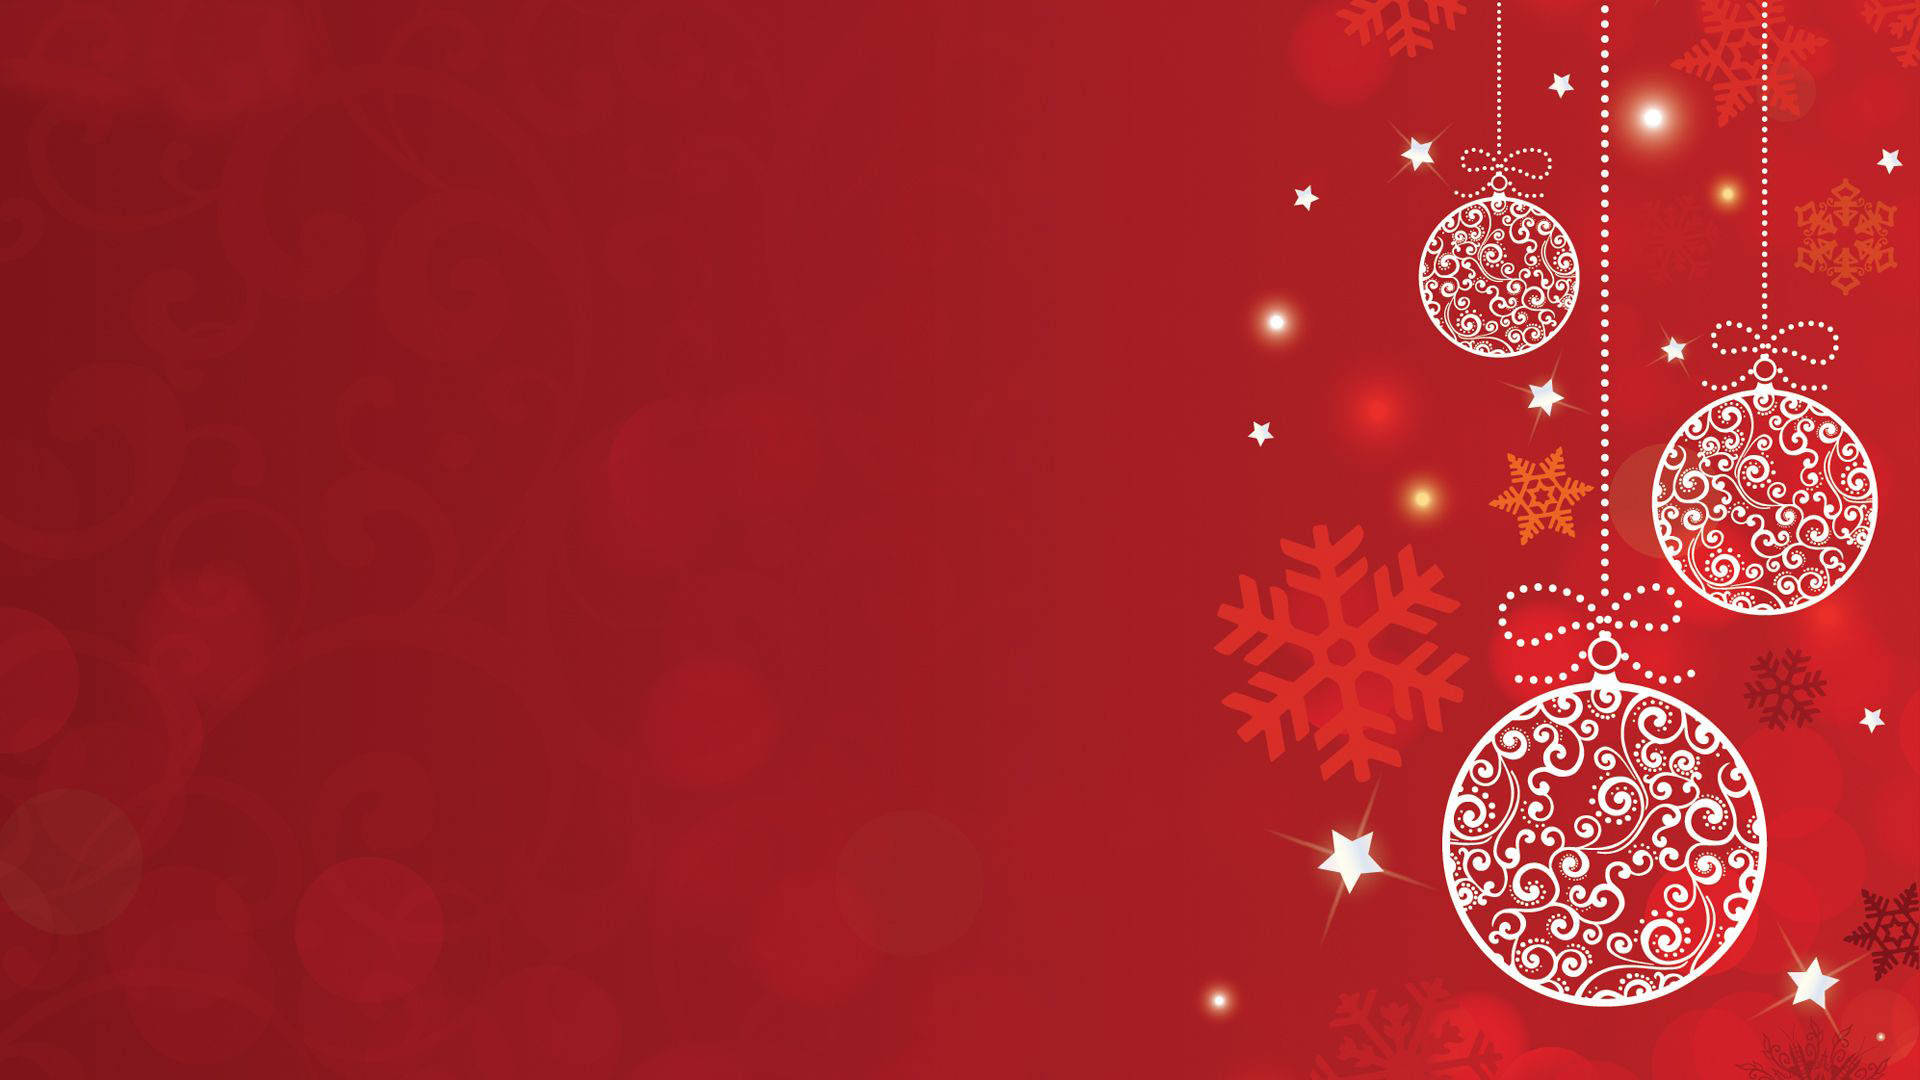 Simple Red And White Christmas Background Background